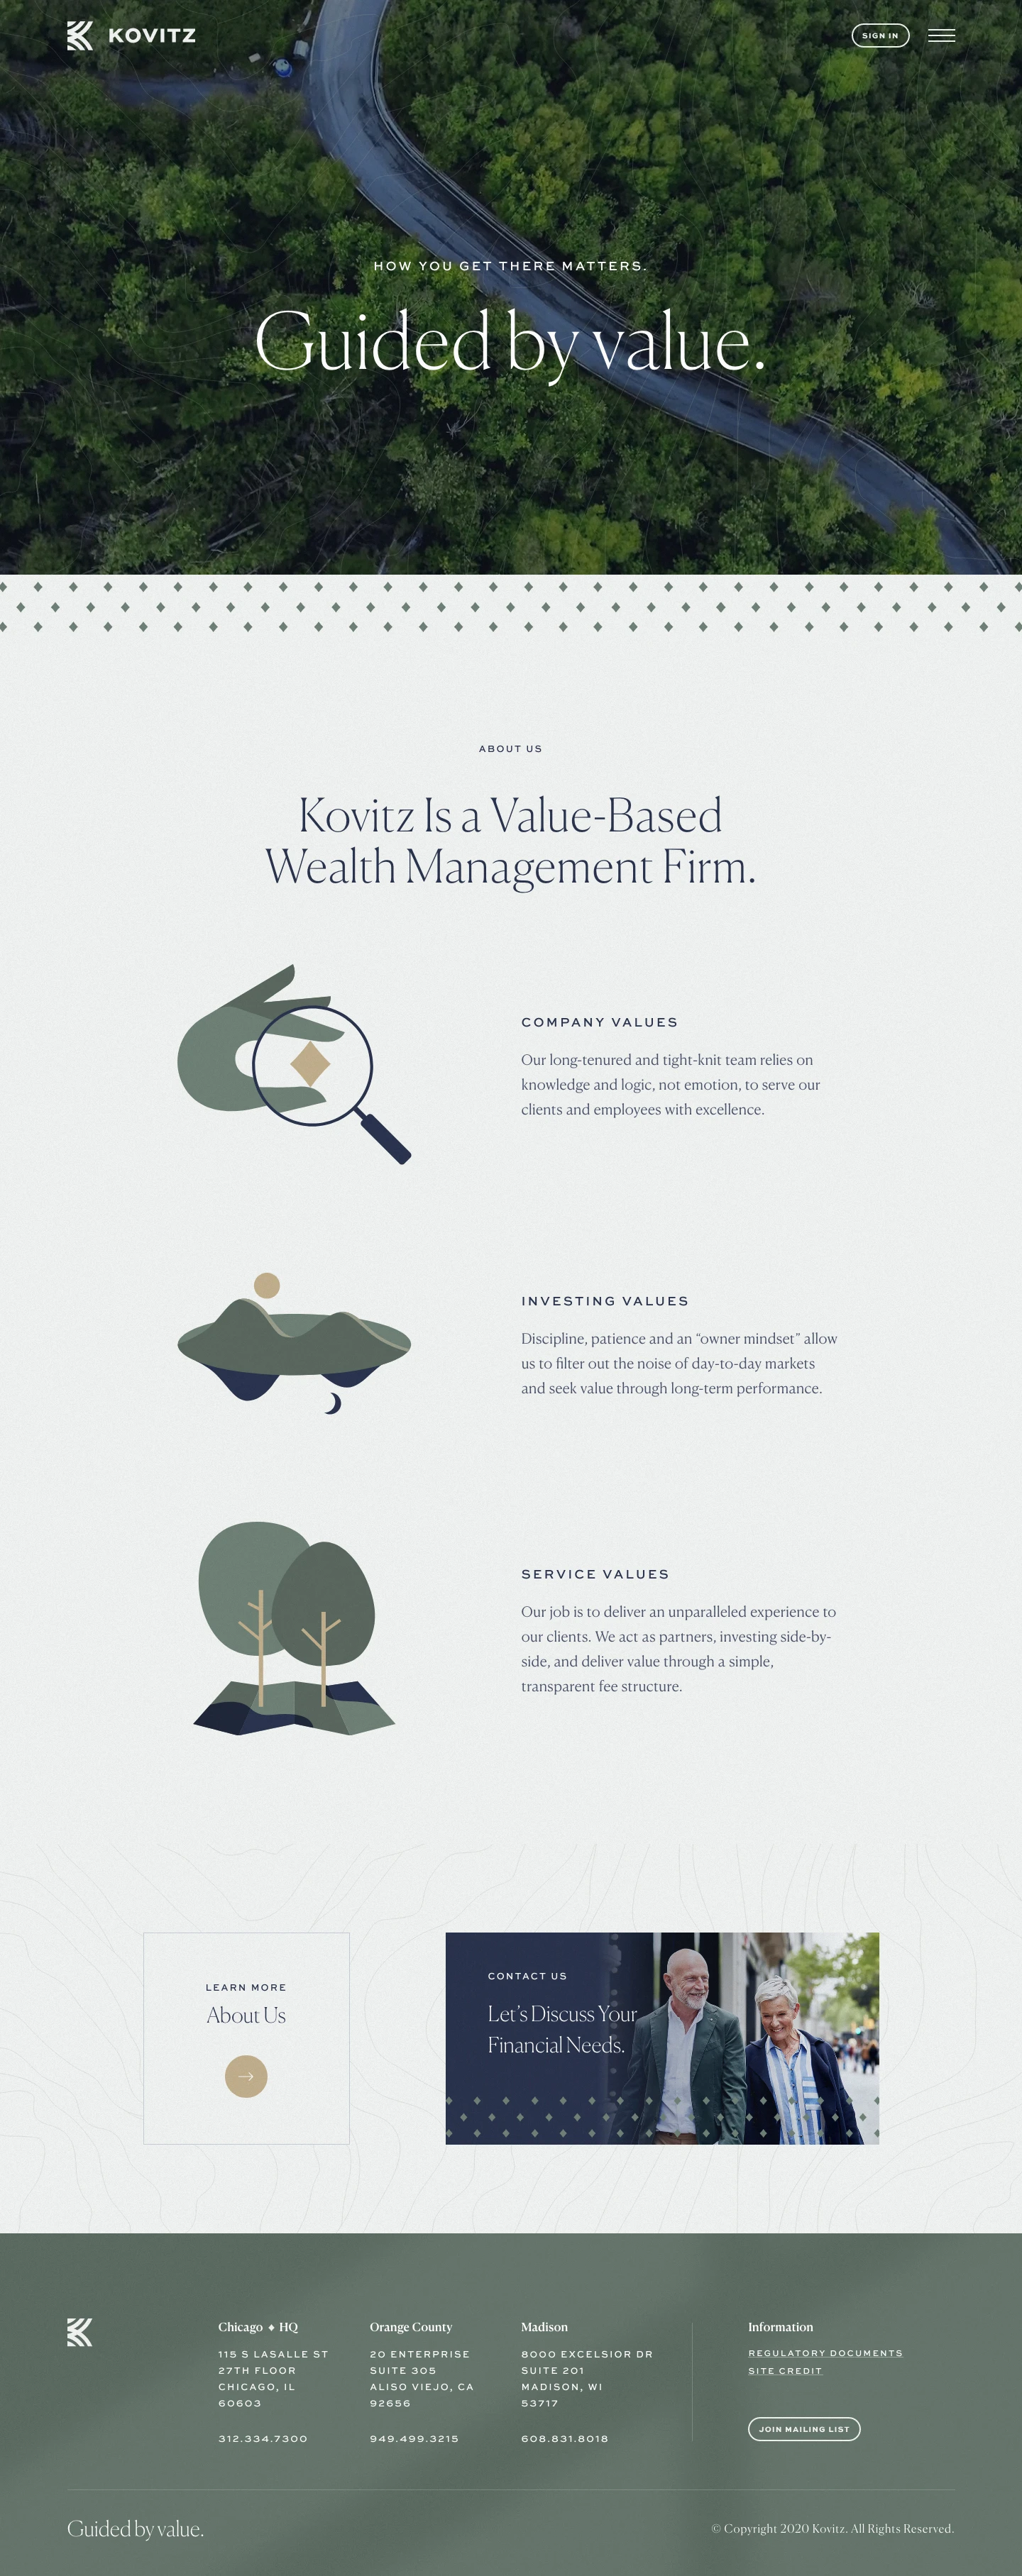 Kovitz Landing Page Example: Kovitz is a wealth management firm with a focus on delivering value across the financial spectrum by adhering to strict investment principles, cultivating a strong team and placing service above all else.